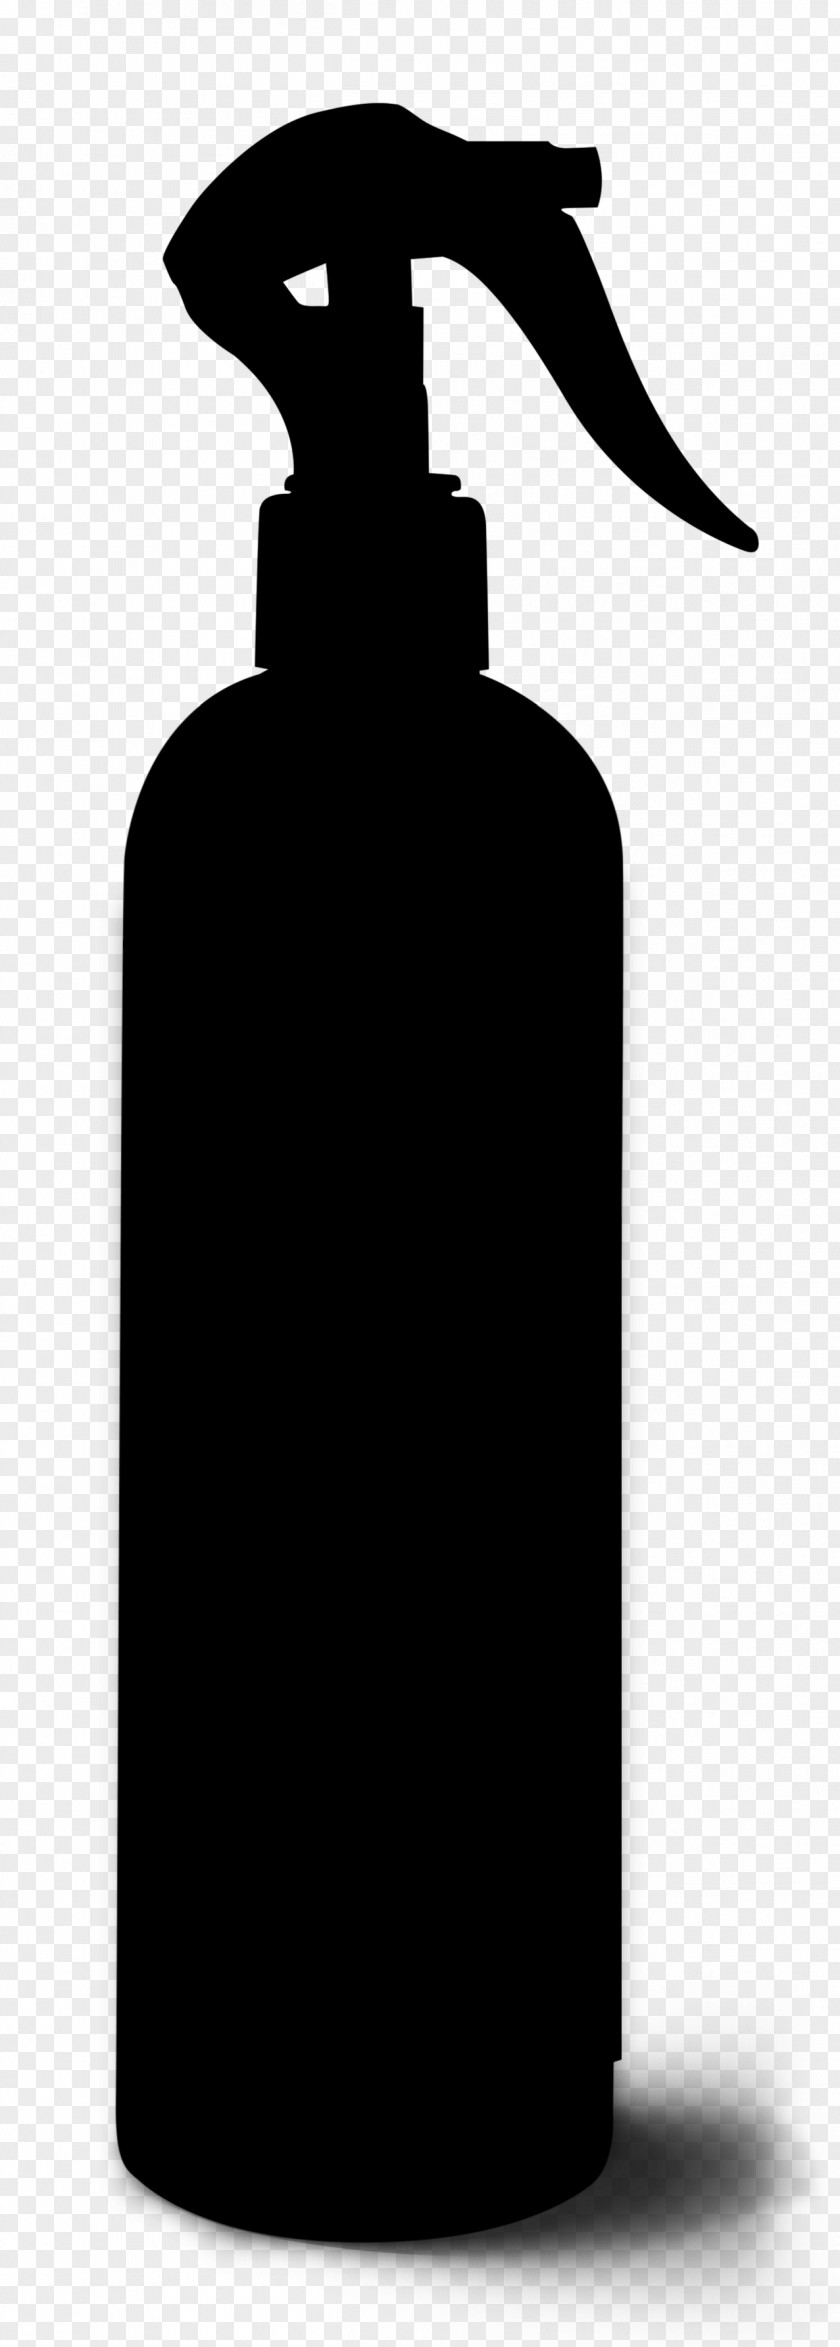 M Product Design Bottle Silhouette Black & White PNG